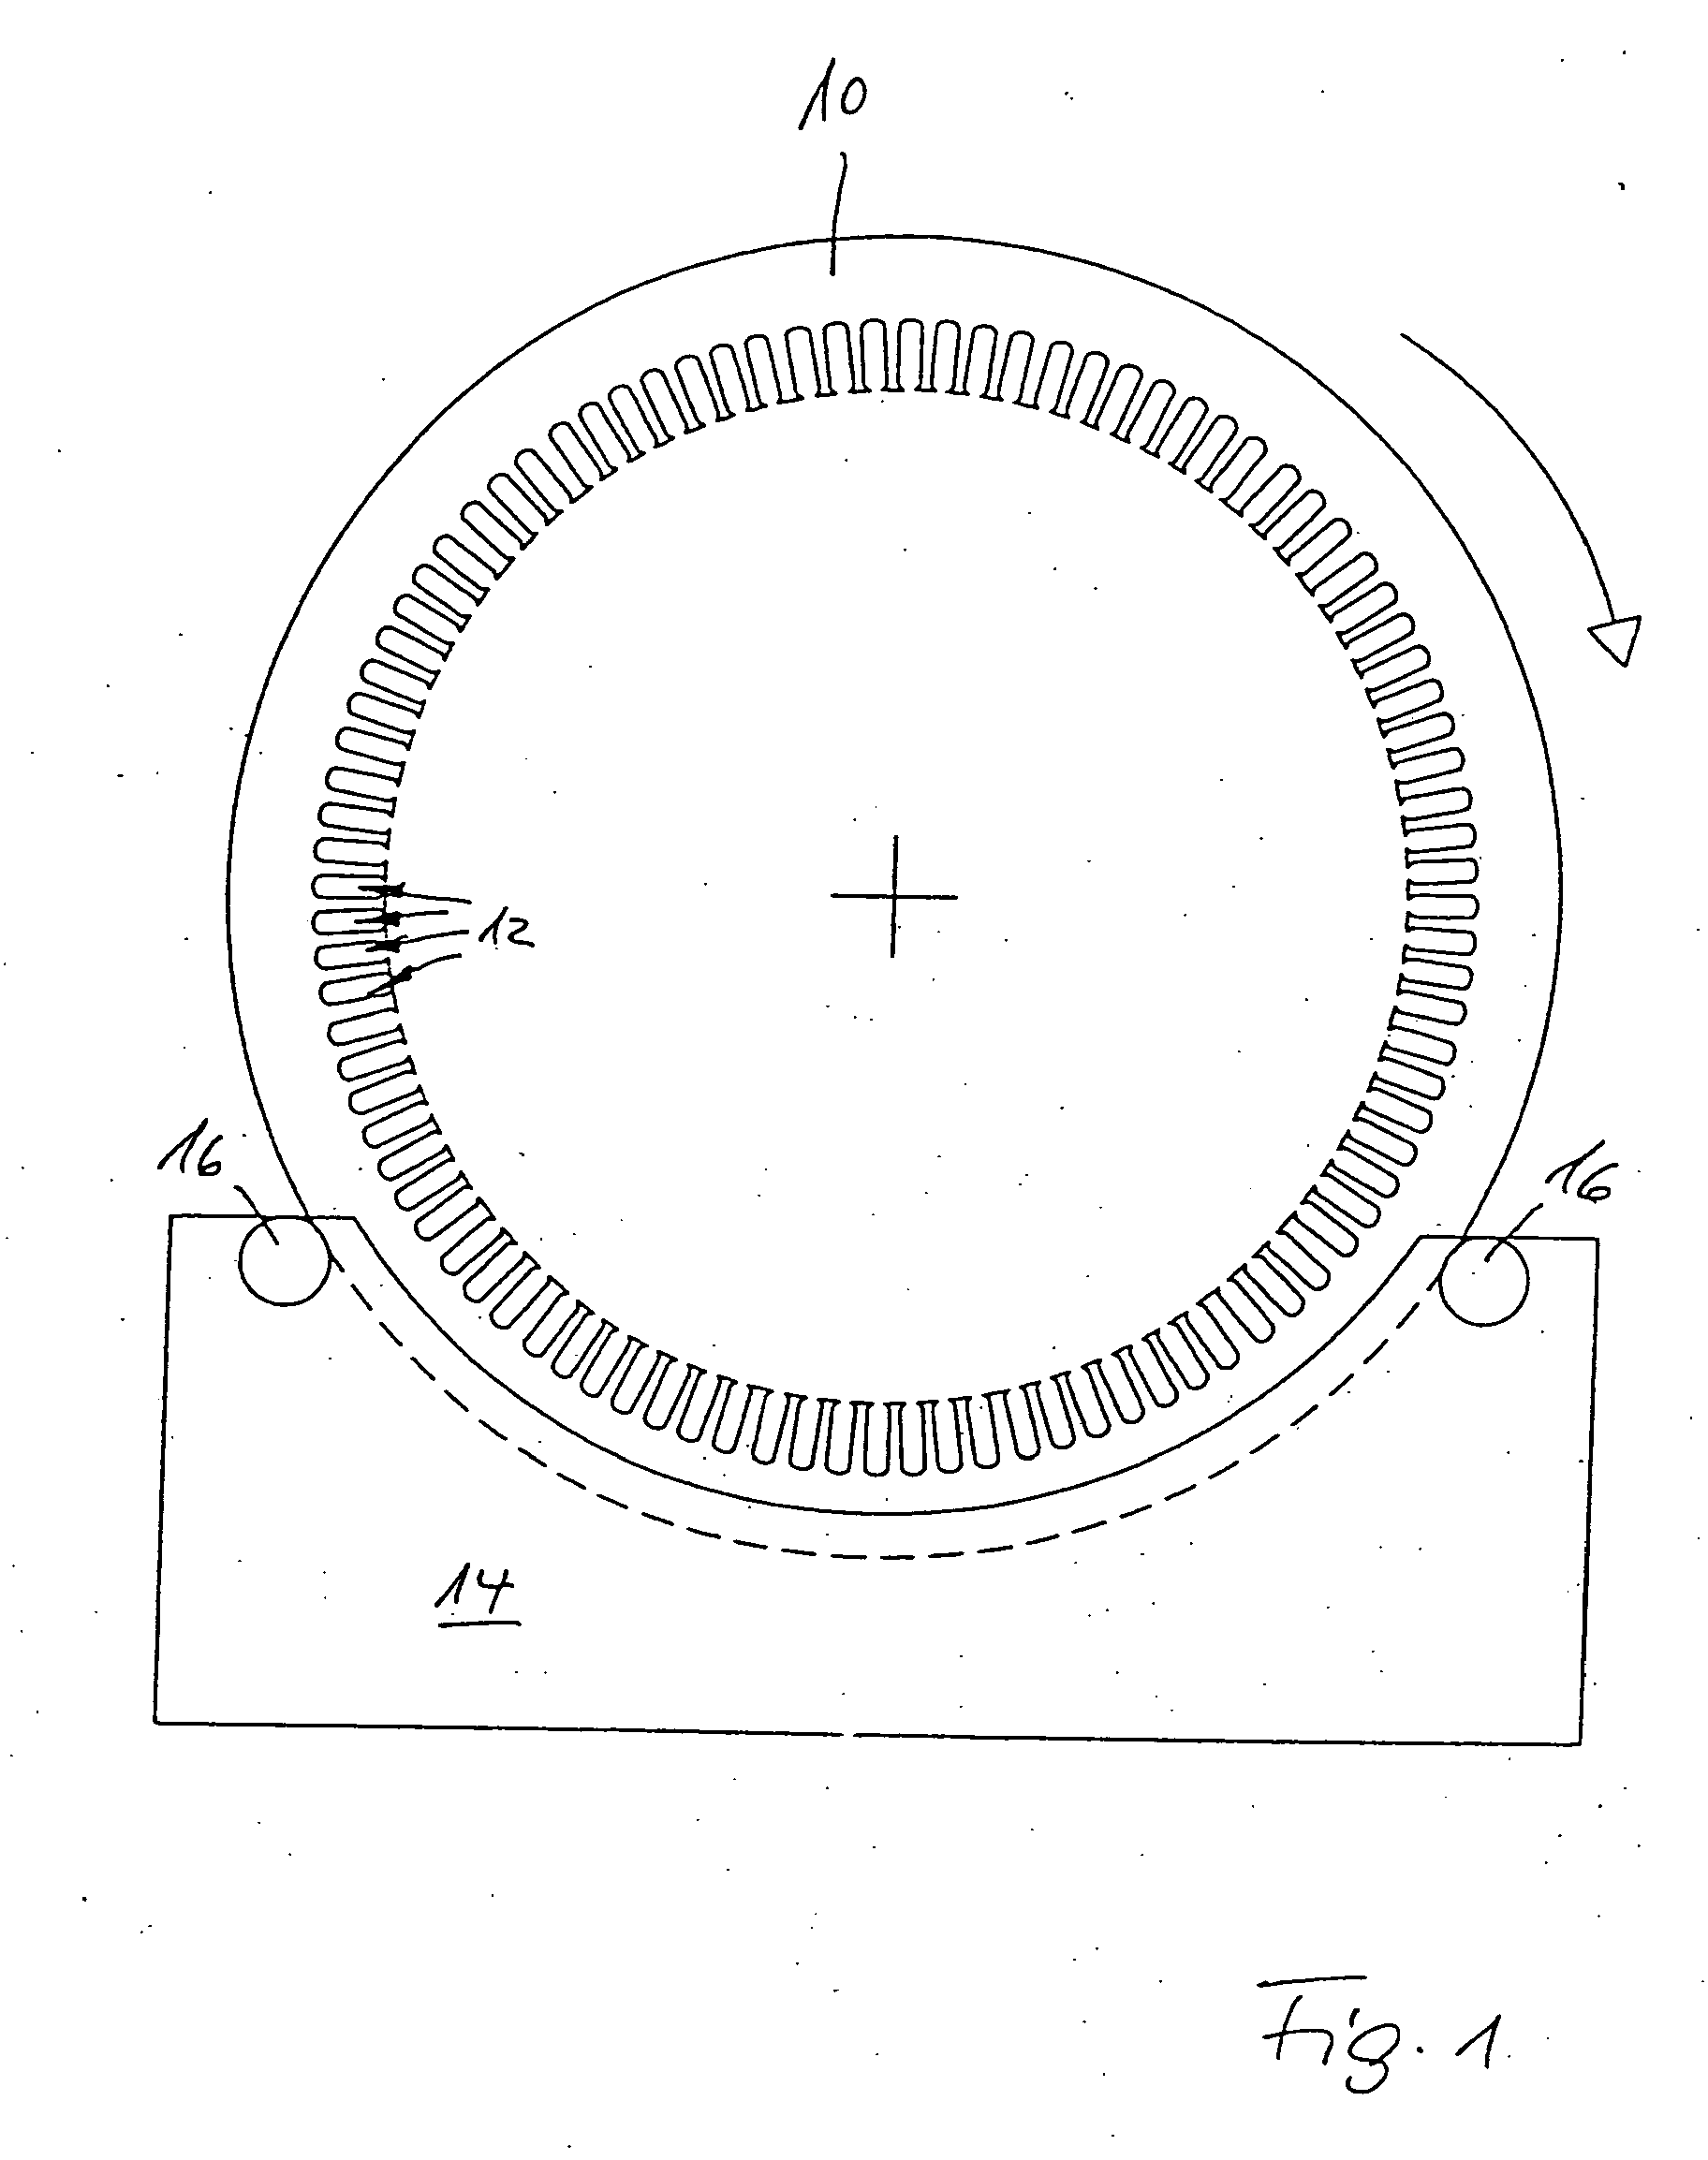 Synchronous machine having a stator with grooves to receive a stator winding, such as a synchronous machine for a wind power installation